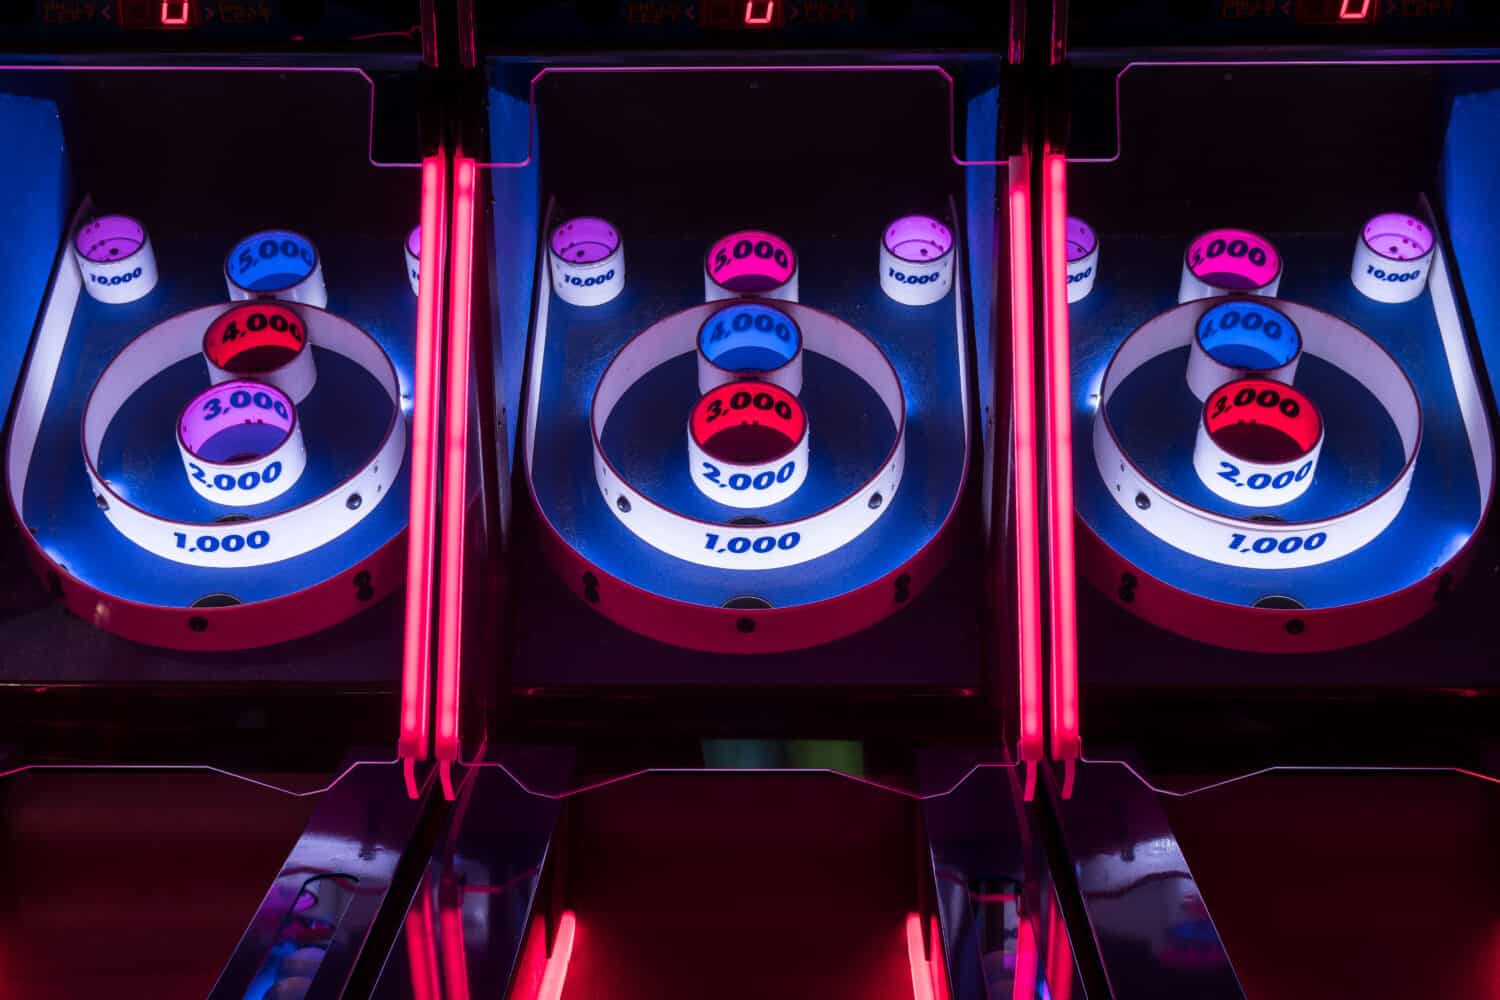 Brightly Colored Lights of Skee-ball Arcade Game